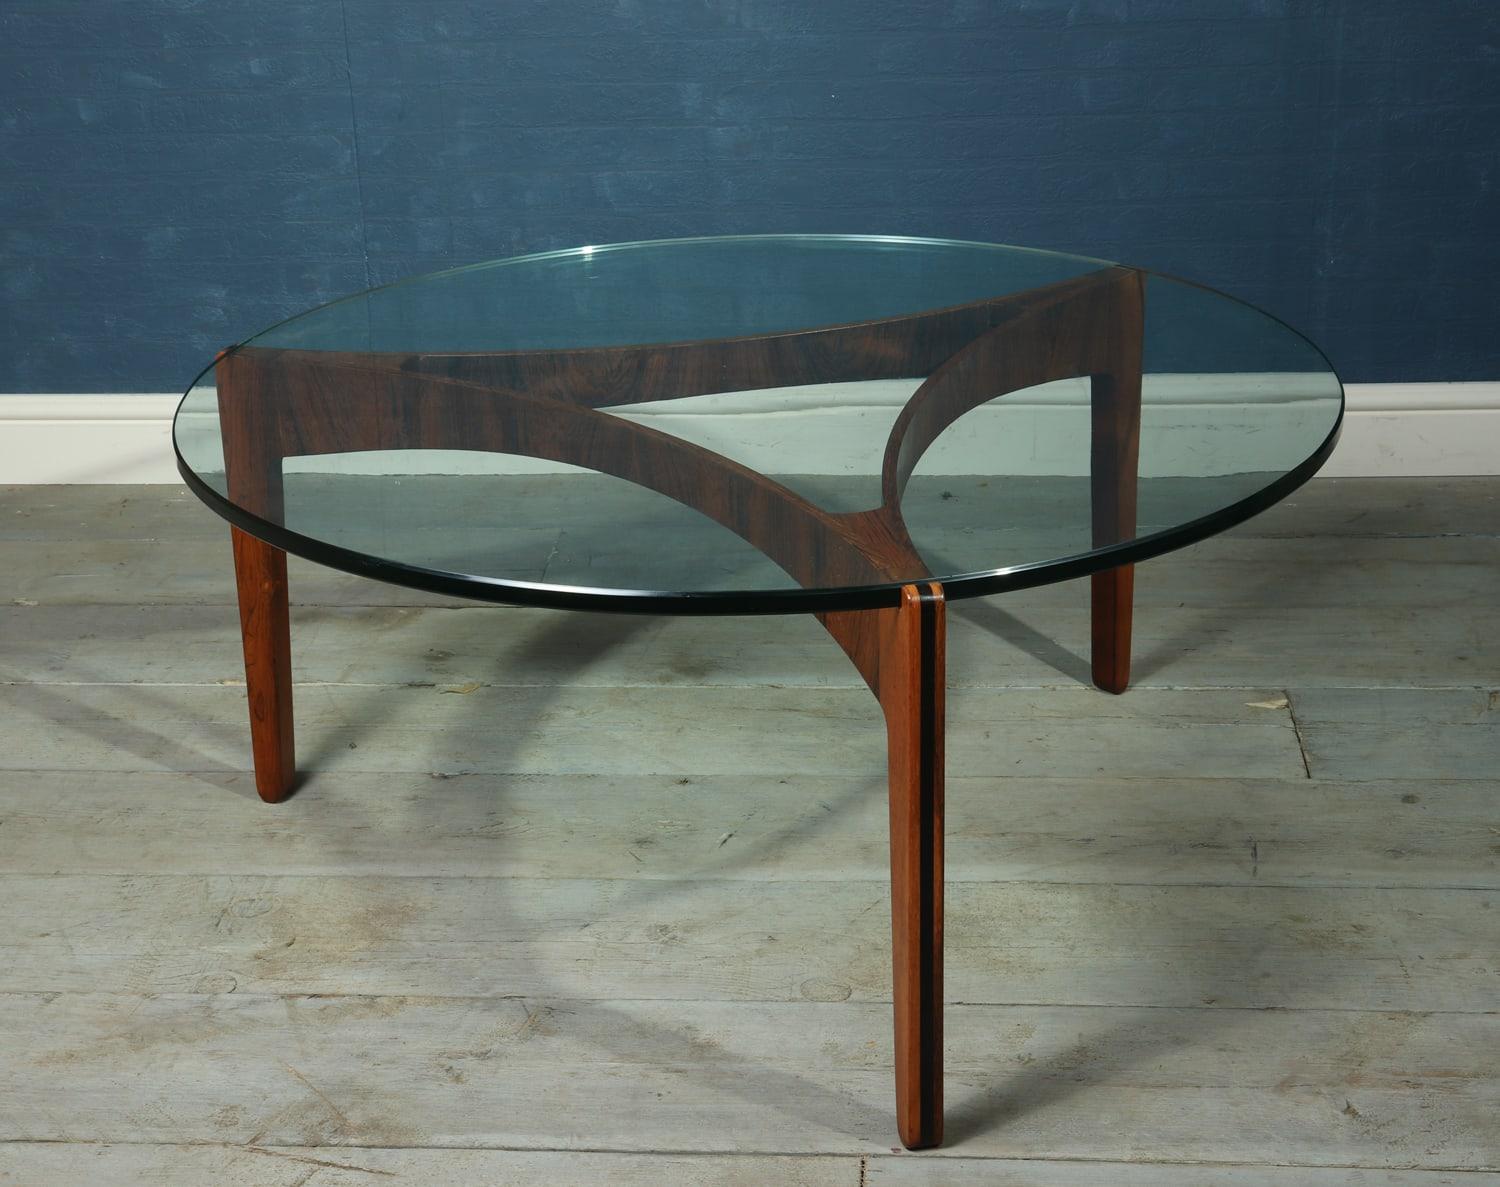 Midcentury Danish rosewood and glass circular coffee table by Sven Ellekaer
A beautiful Danish design coffee table designed by Sven Ellekaer and produced by Christian Linneberg in the 1960s, the piece is in excellent original condition with minimal